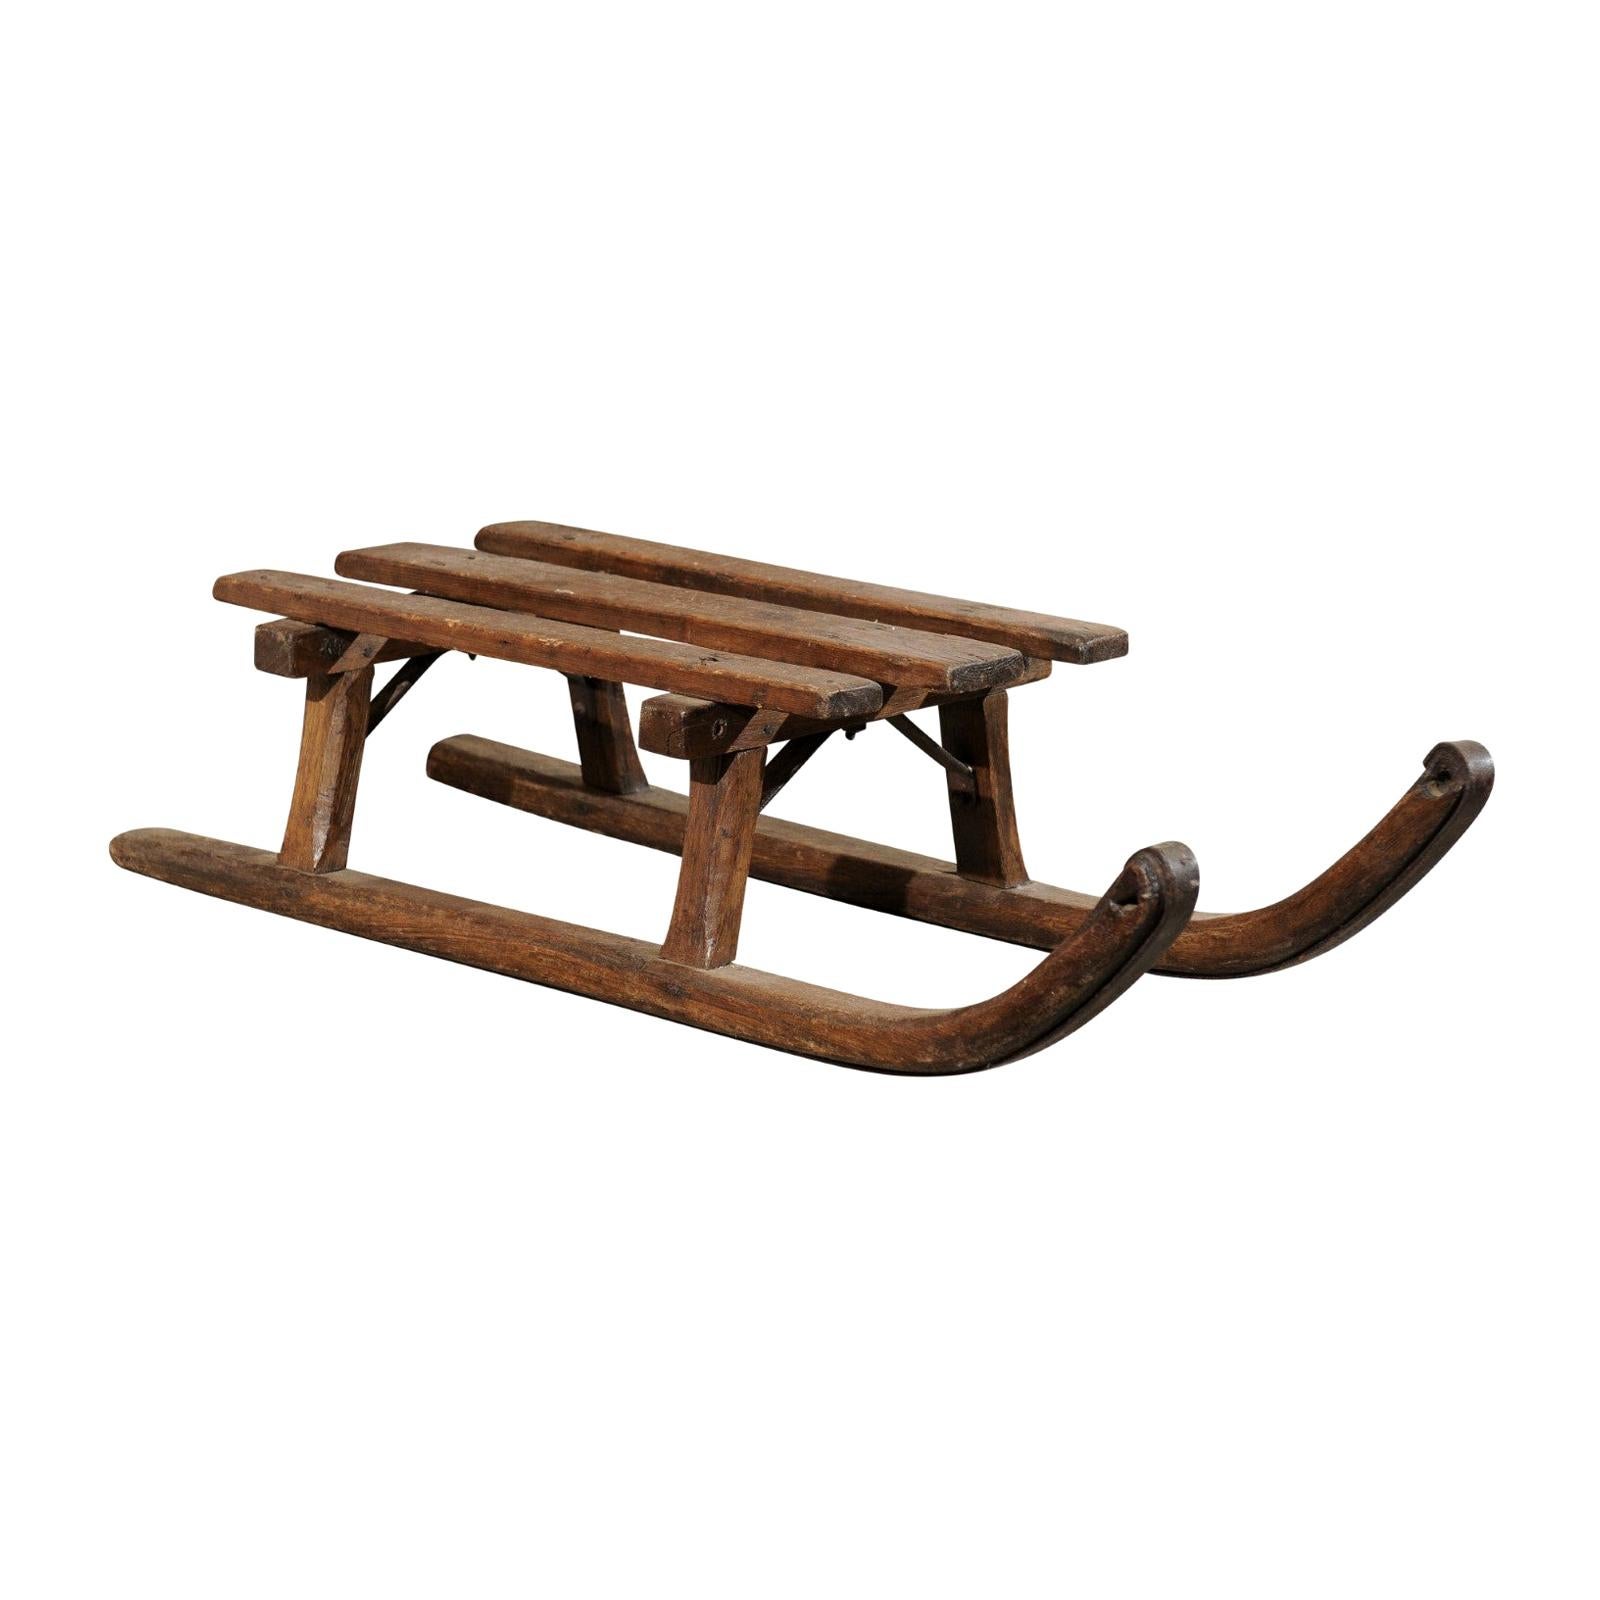 French 19th Century Rustic Small Size Wooden Sled with Weathered Patina